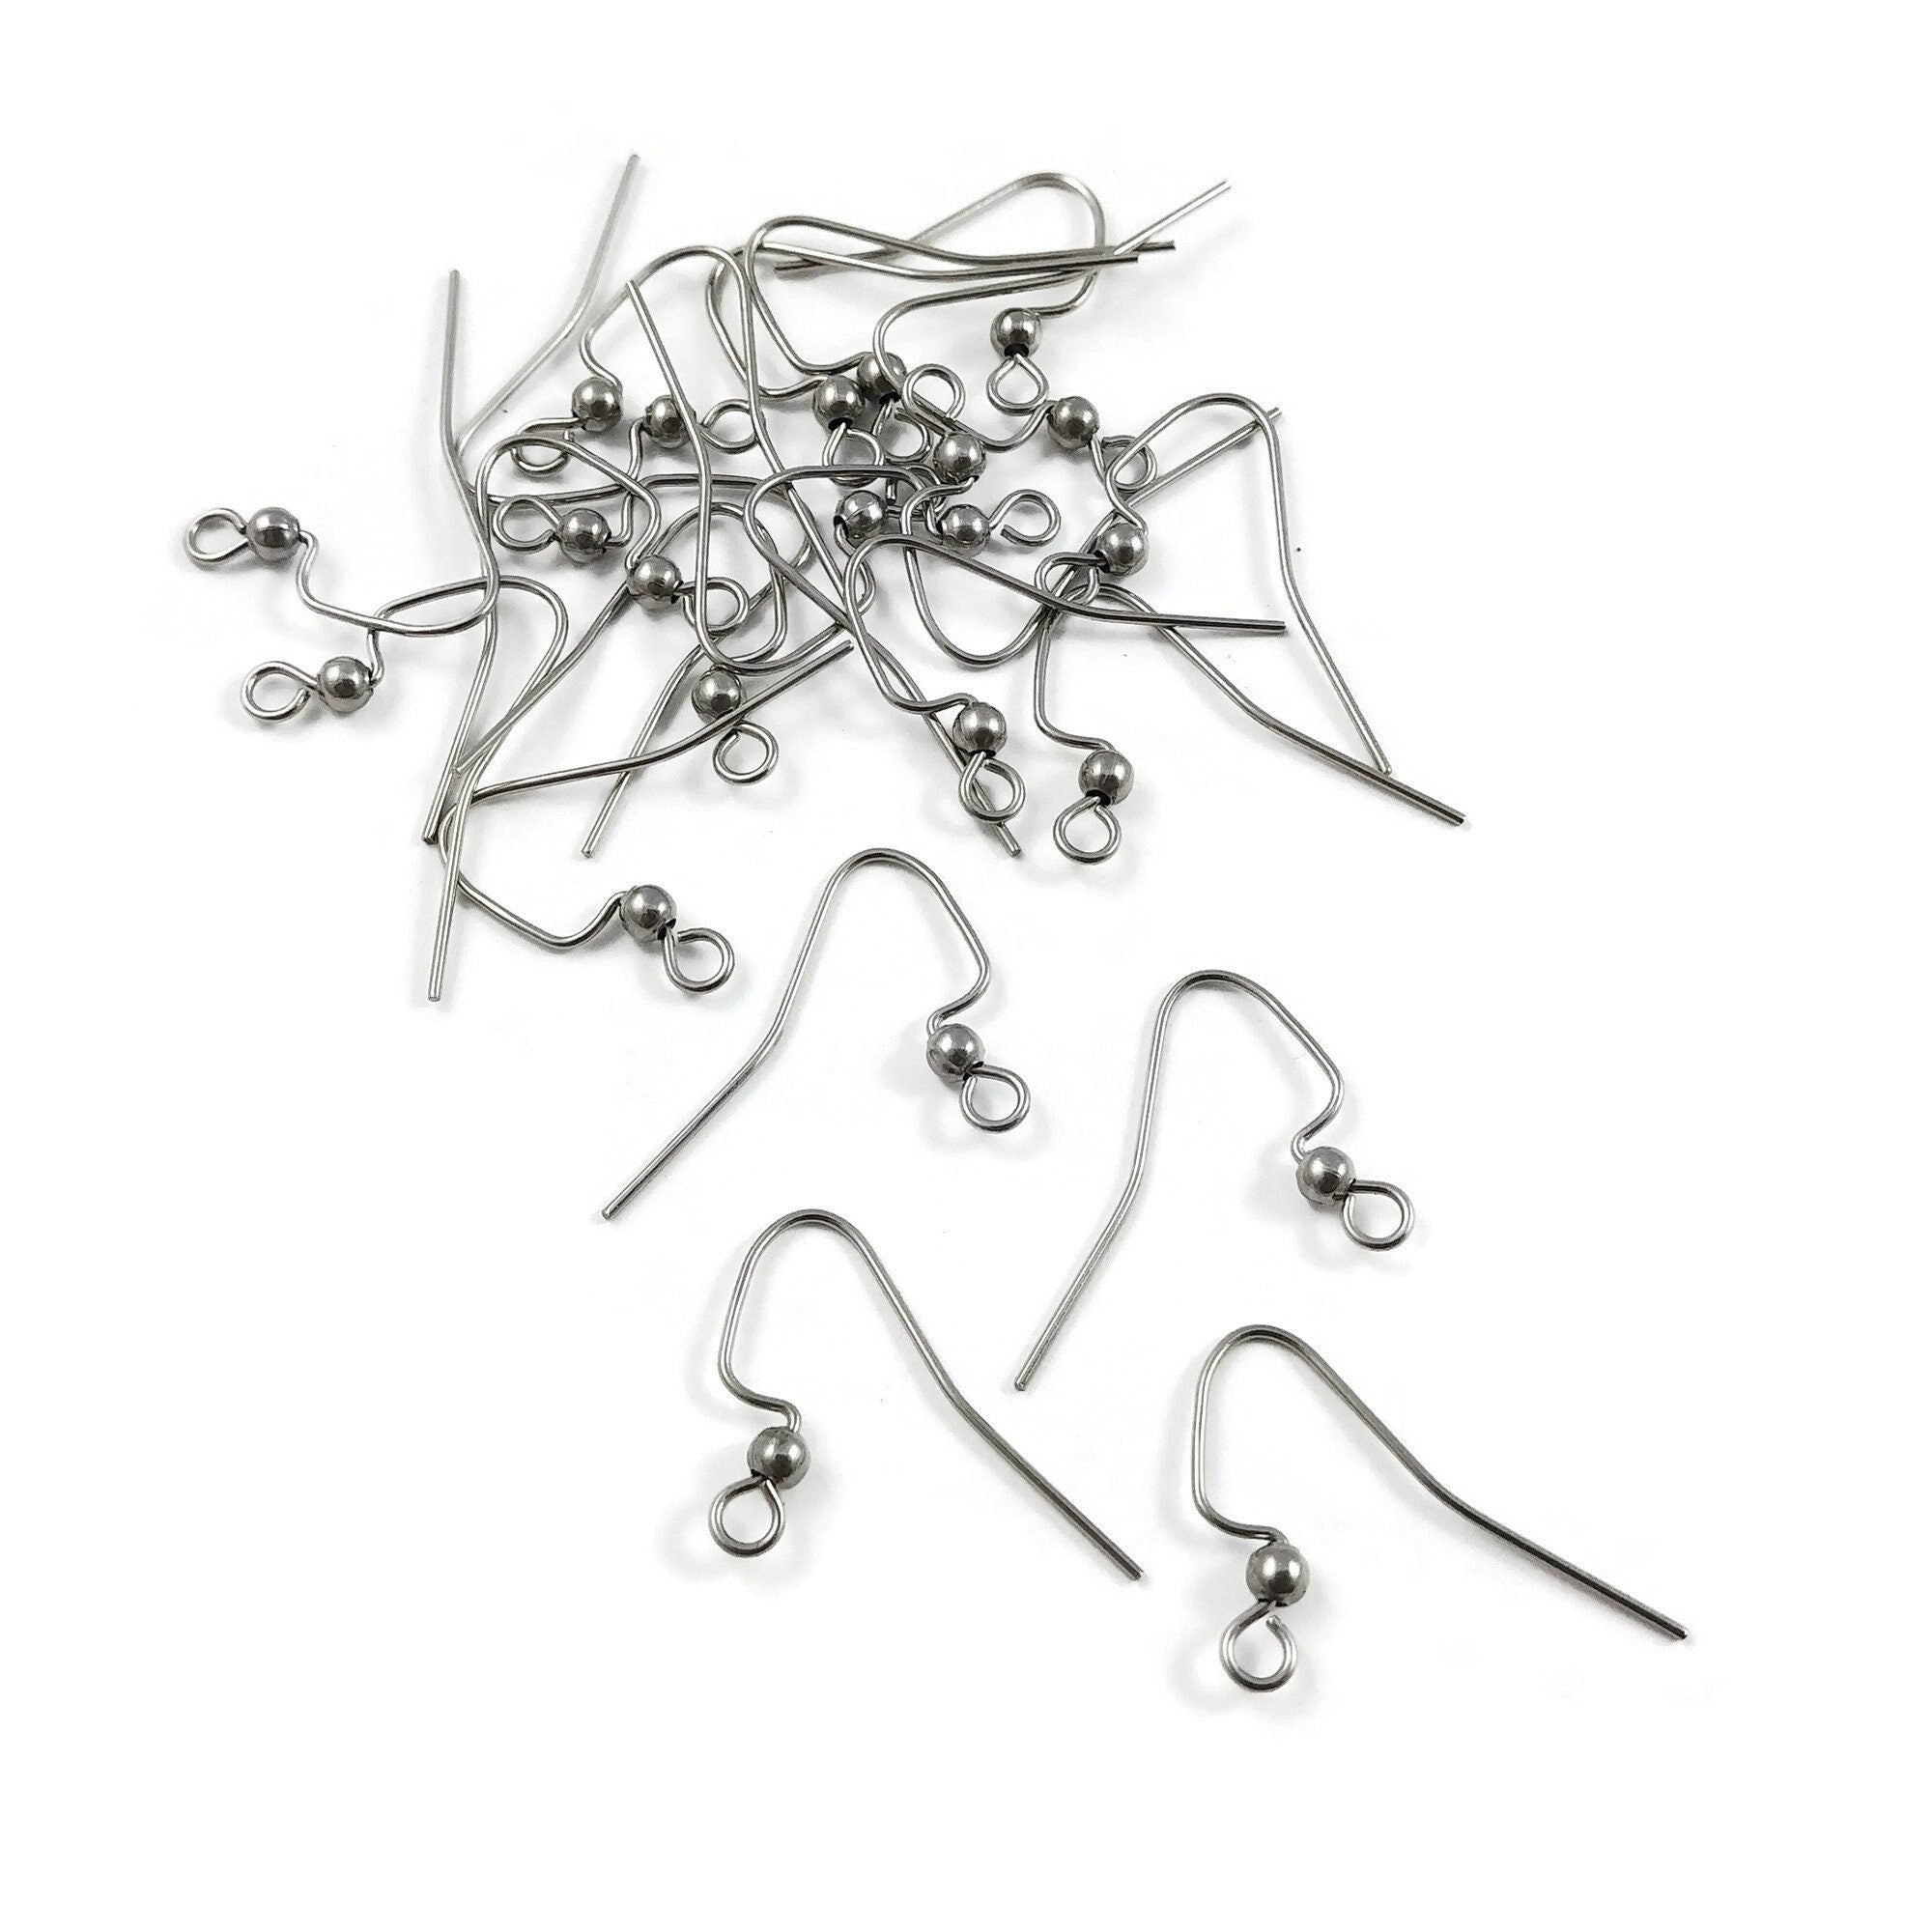 Stainless steel ear wires, Silver french earring hooks, Hypoallergenic earring findings, 20 pcs (10 pairs)